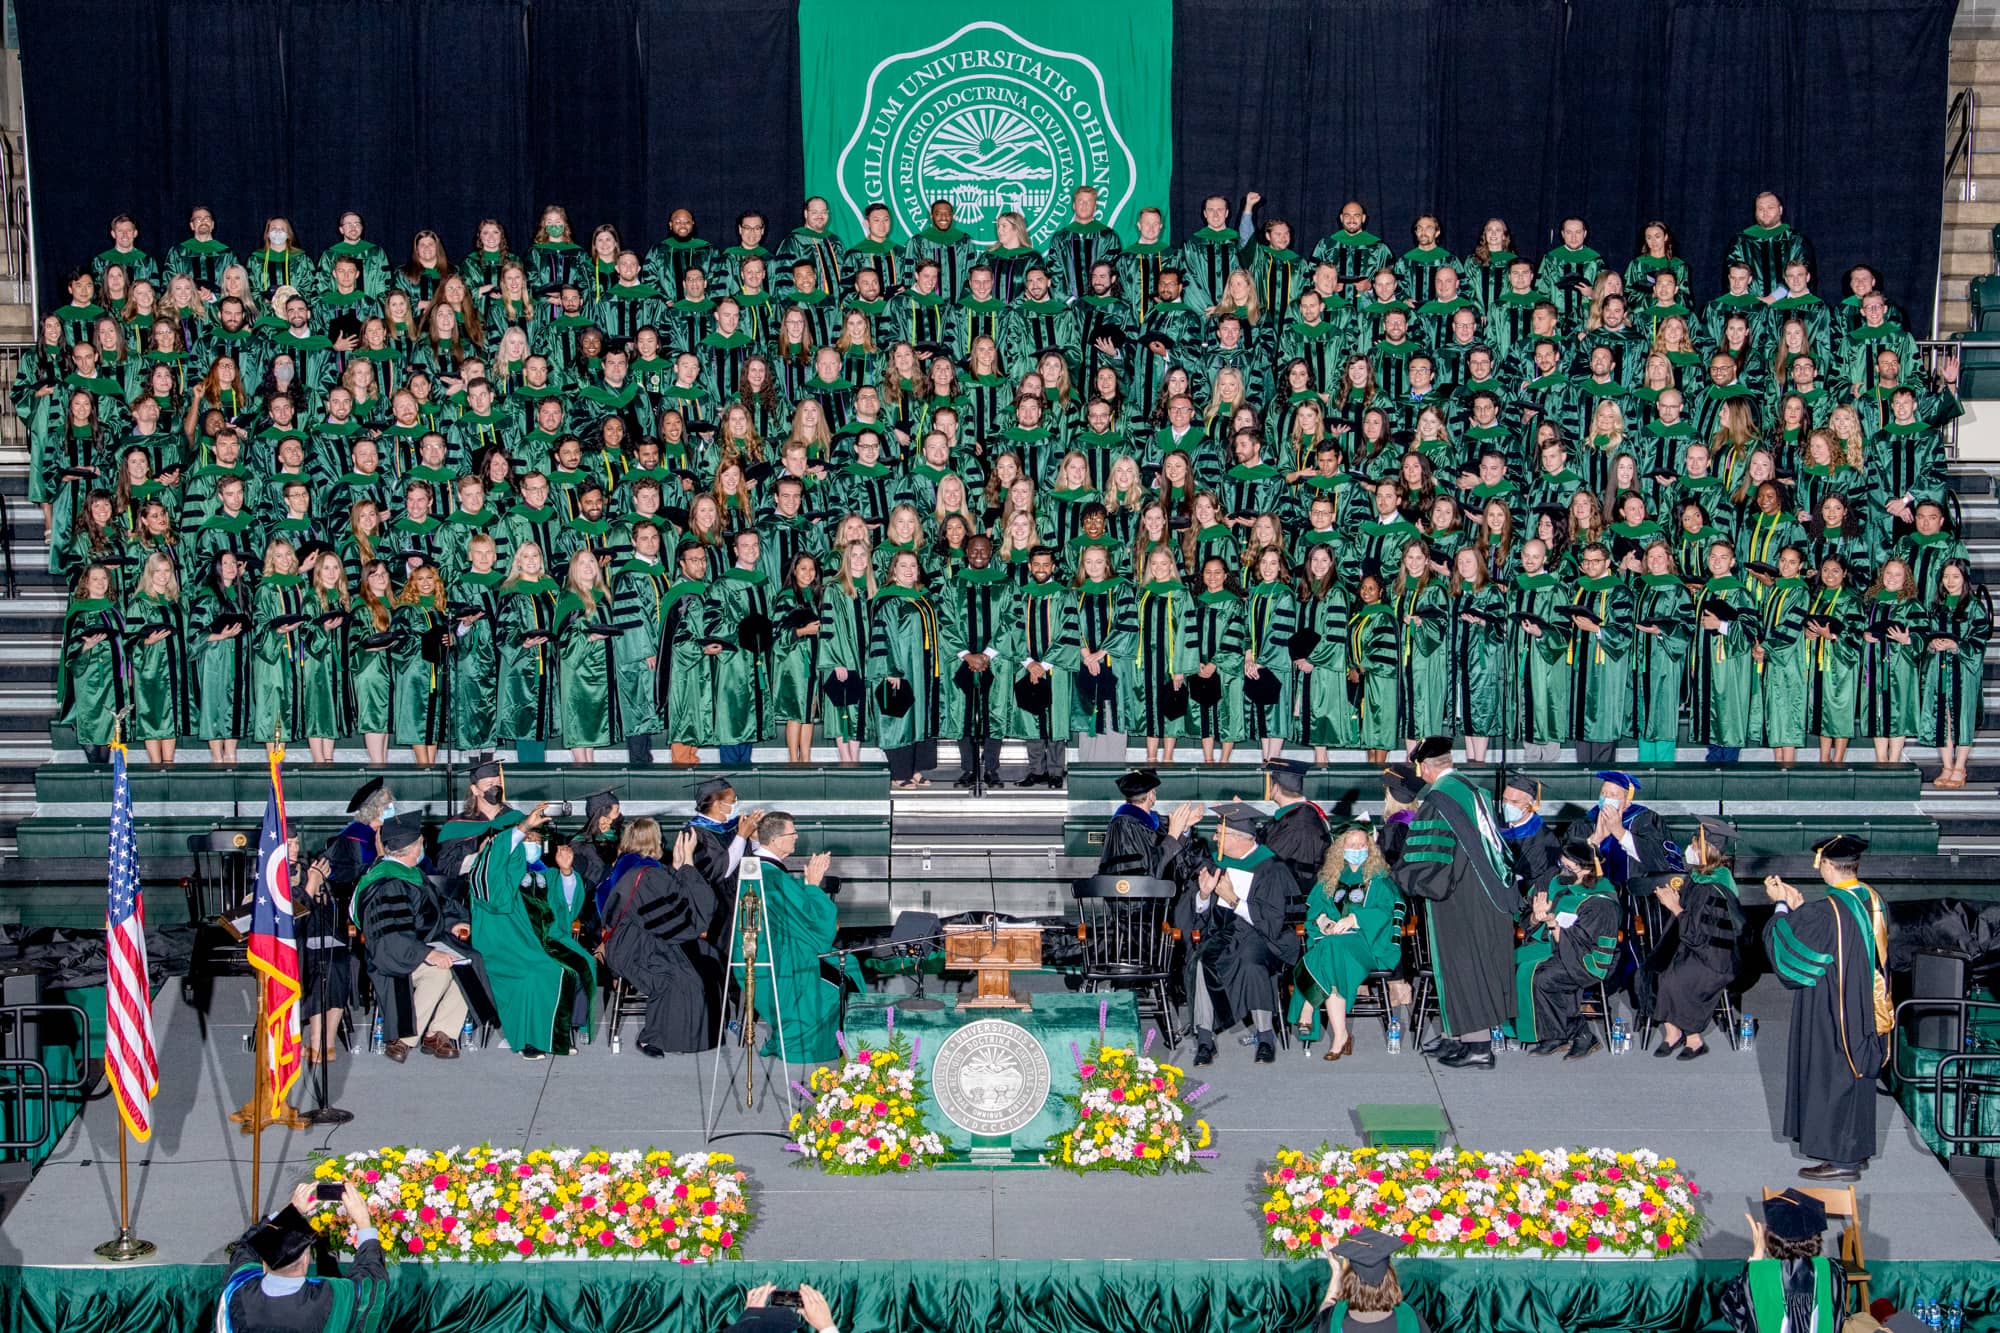 The Heritage College Class of 2022 poses for a photo on stage at commencement.